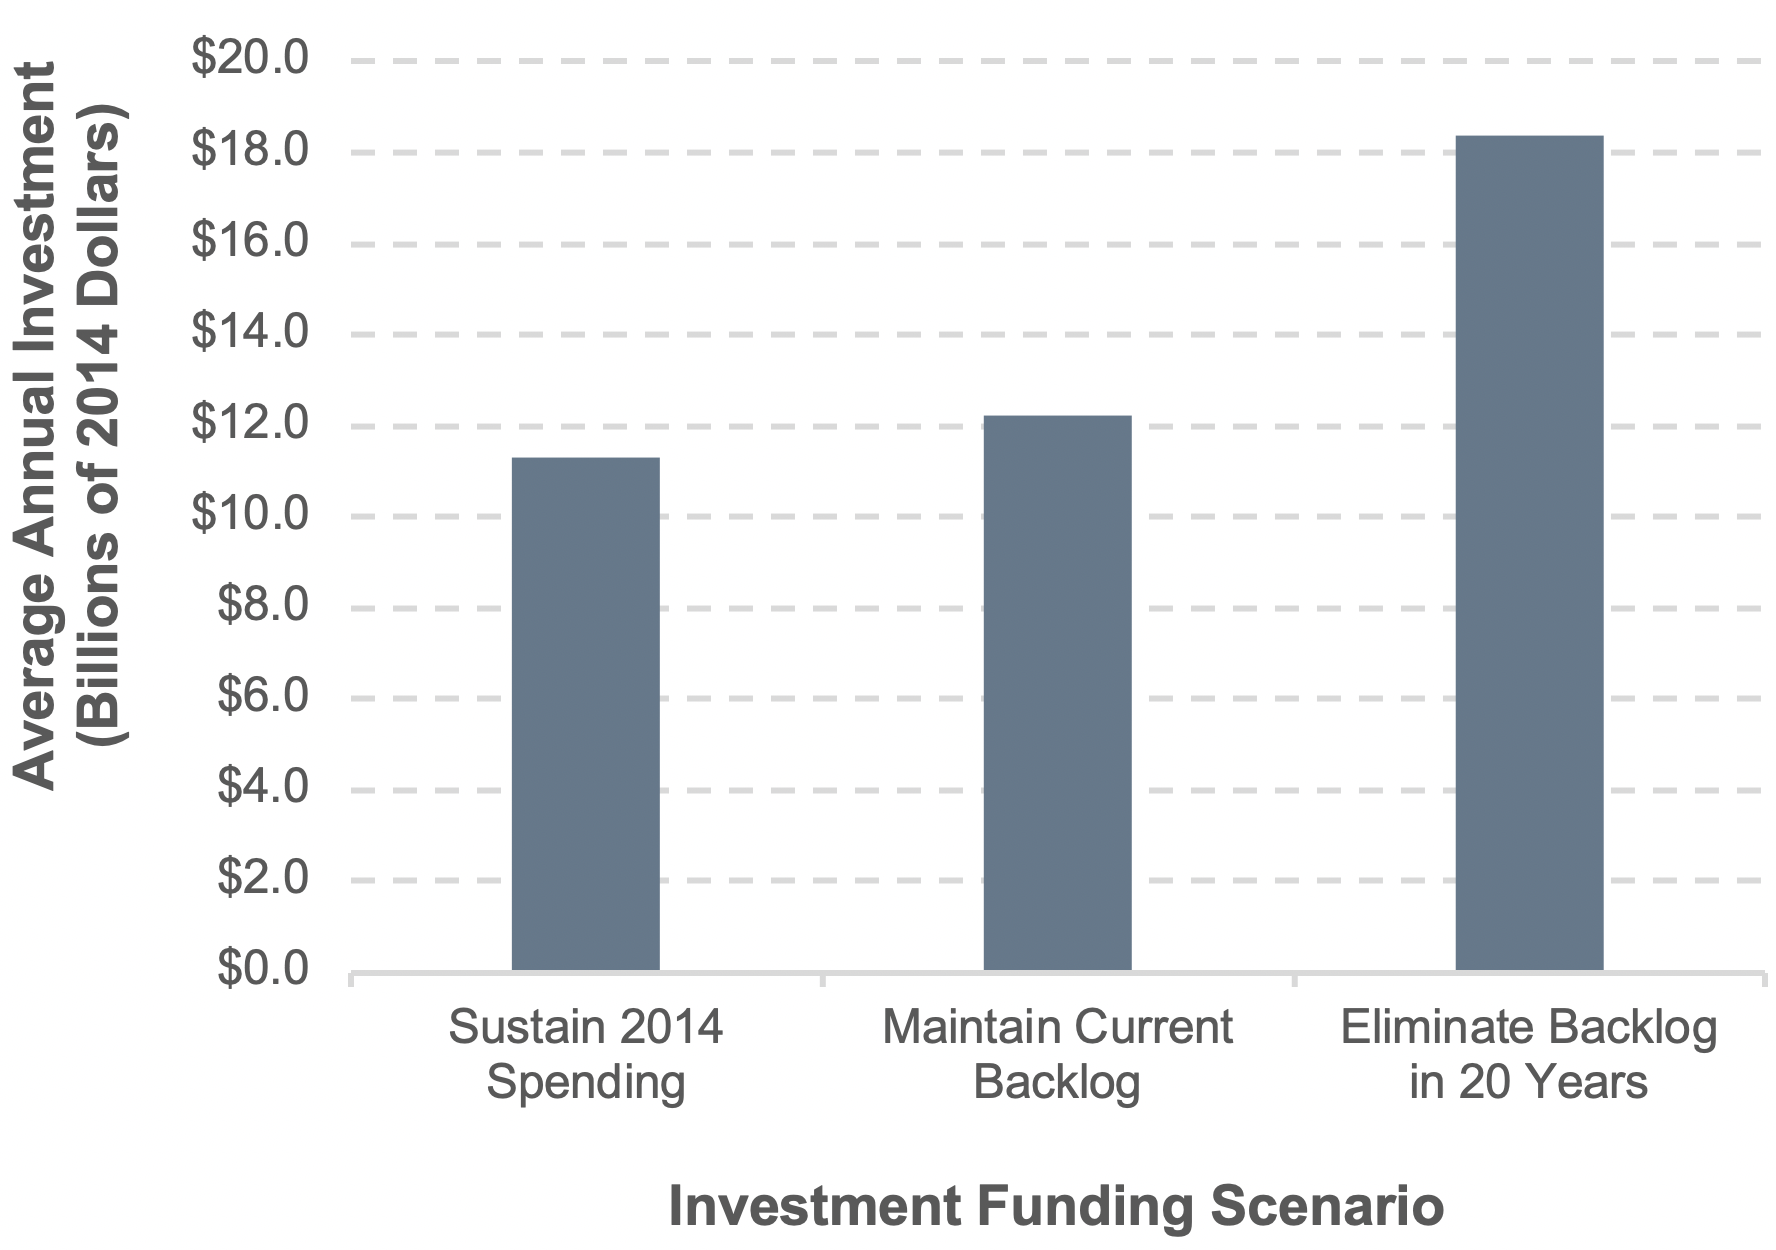 A bar chart shows average annual investment in billions of 2014 dollars under three scenarios. In the Sustain 2014 Spending scenario, average annual investment is $11.3 billion. In the Maintain Current Backlog scenario, average annual investment is $12.2 billion. In the Eliminate Backlog in 20 Years scenario, average annual investment is $18.4 billion. Source: Transit Economic Requirements Model.